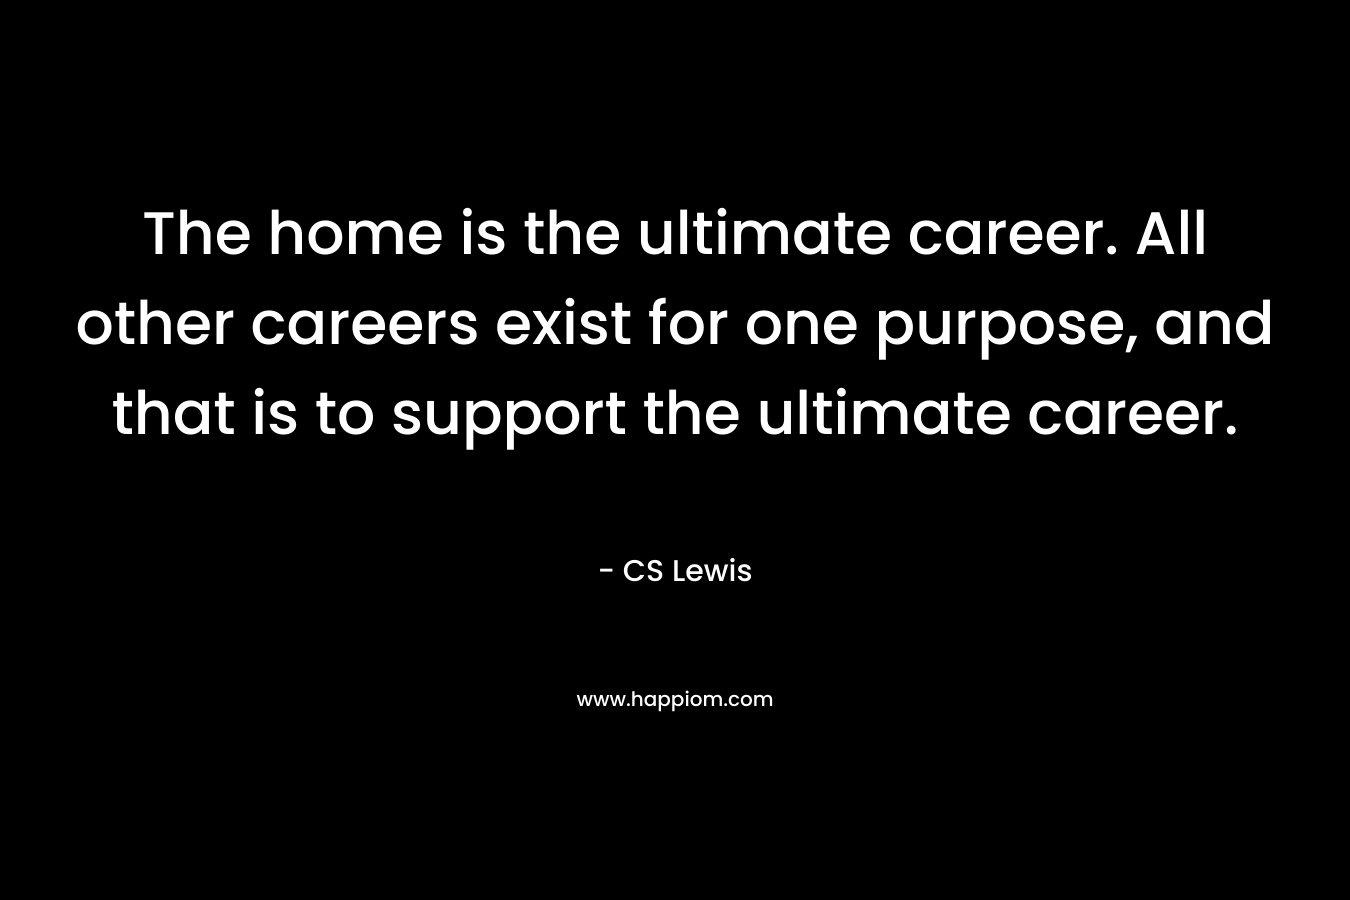 The home is the ultimate career. All other careers exist for one purpose, and that is to support the ultimate career. – CS Lewis